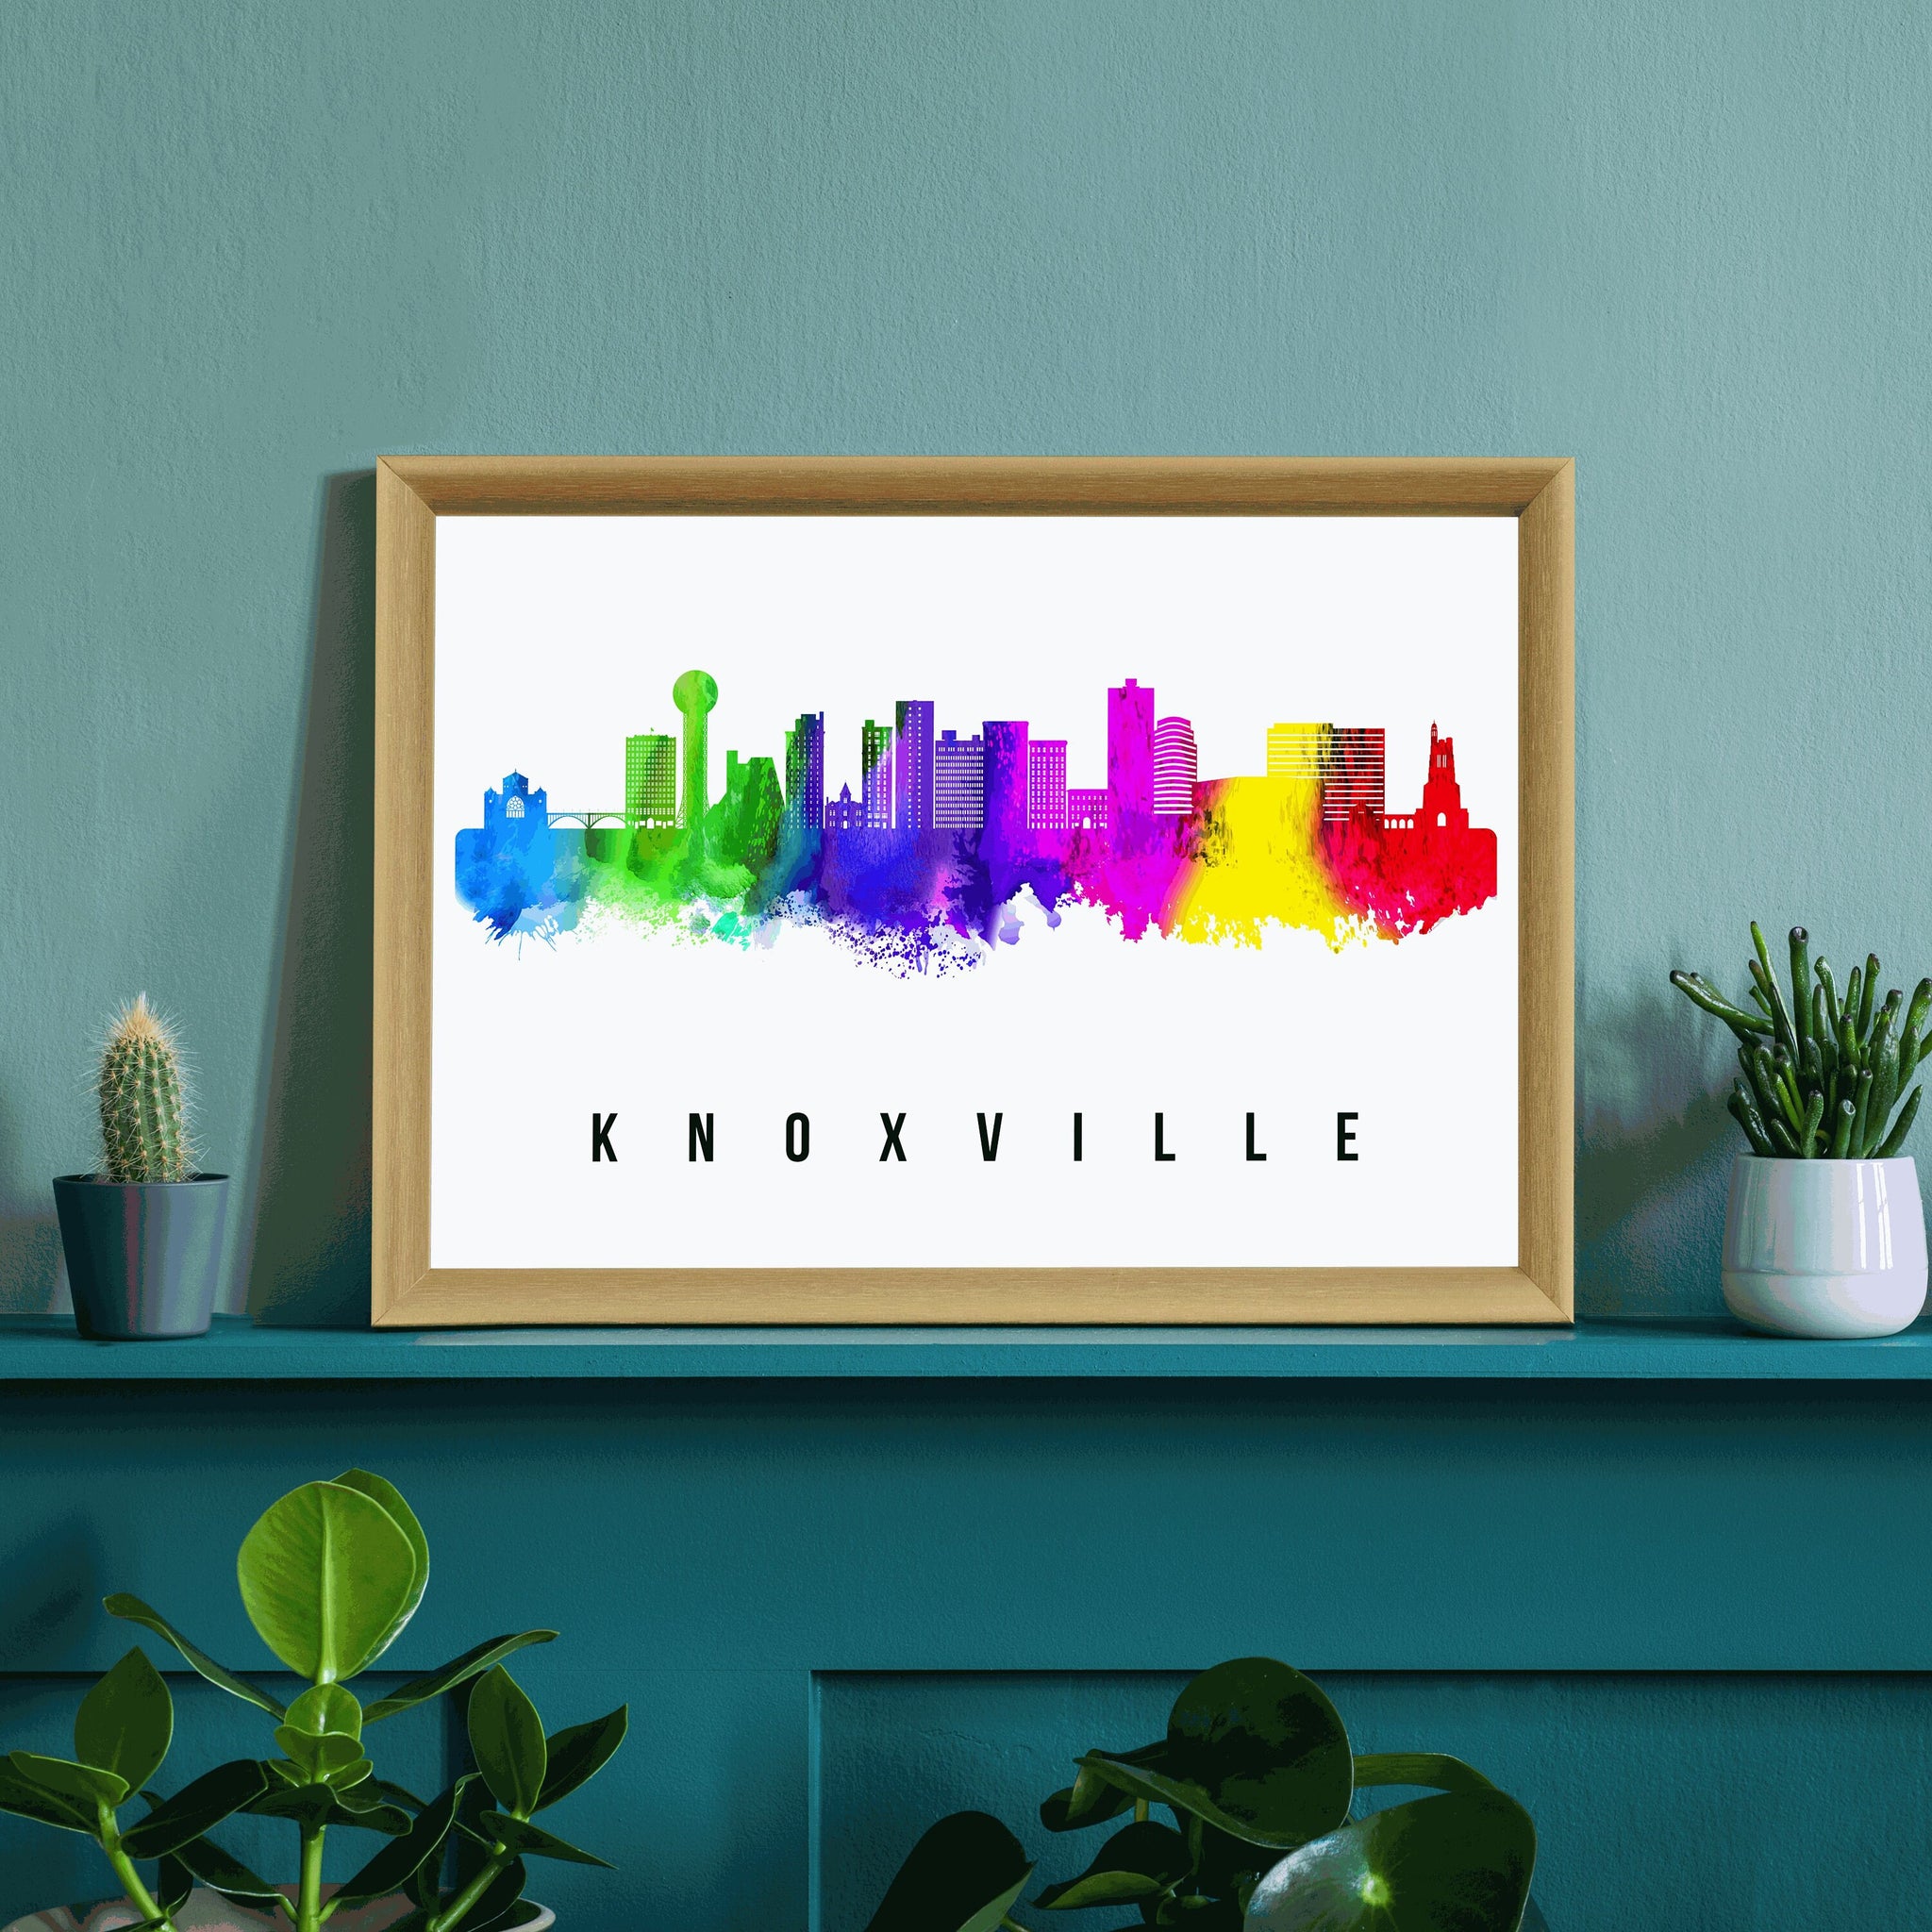 Knoxville - Tennessee Skyline Poster, Knoxville - Tennessee Cityscape Painting, Landmark and Cityscape Print, Home and Office Wall Art